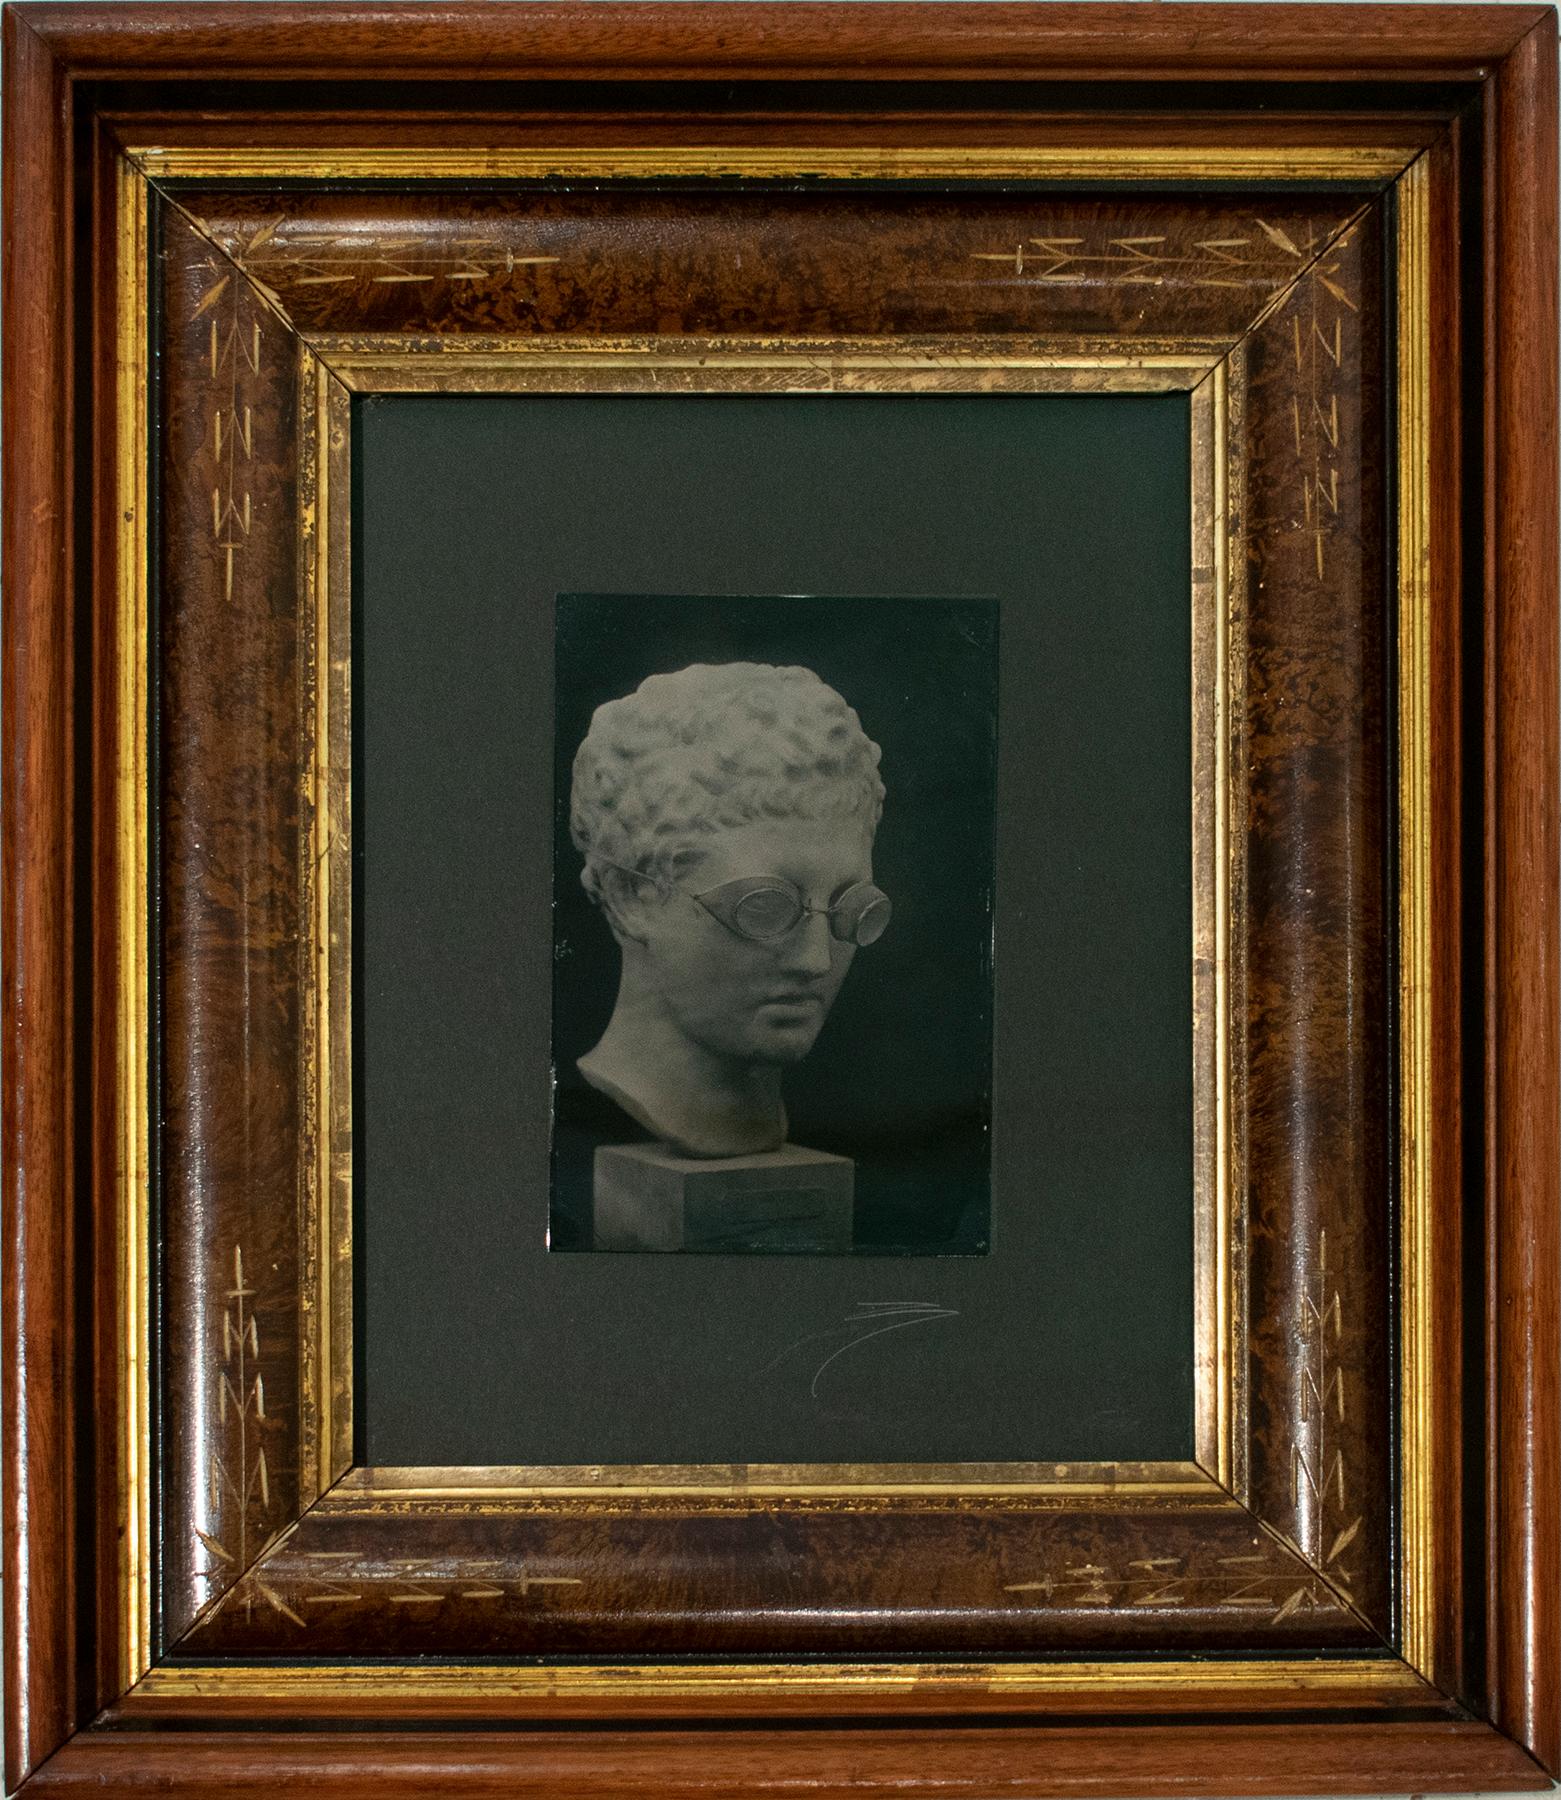 Hermes with Goggles On (Tin Type Triptych of Statue, Vintage Victorian Frame) - Photograph by David Sokosh